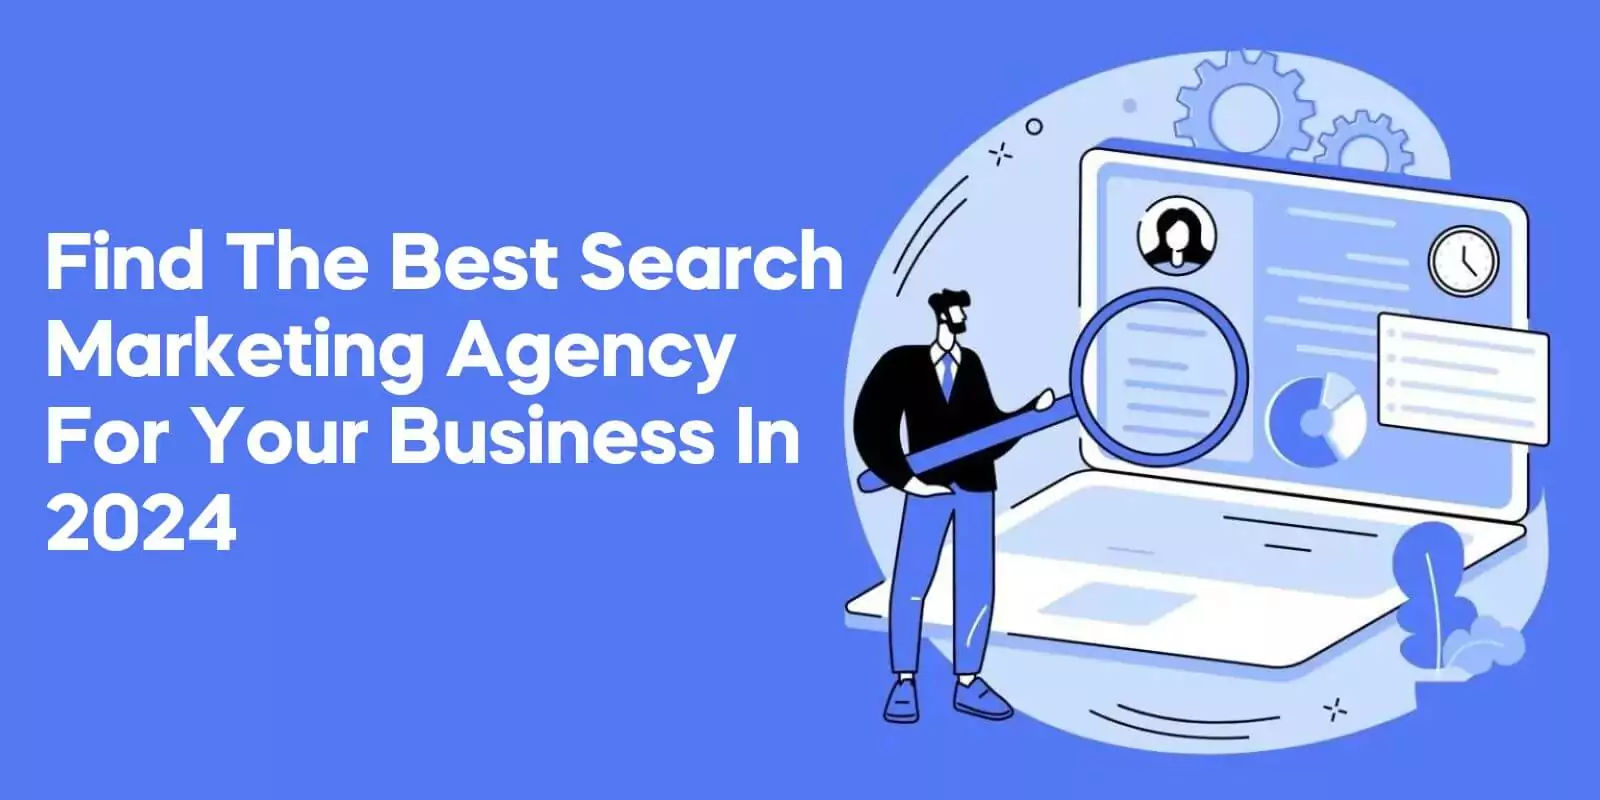 Find the Best Search Marketing Agency for Your Business in 2024